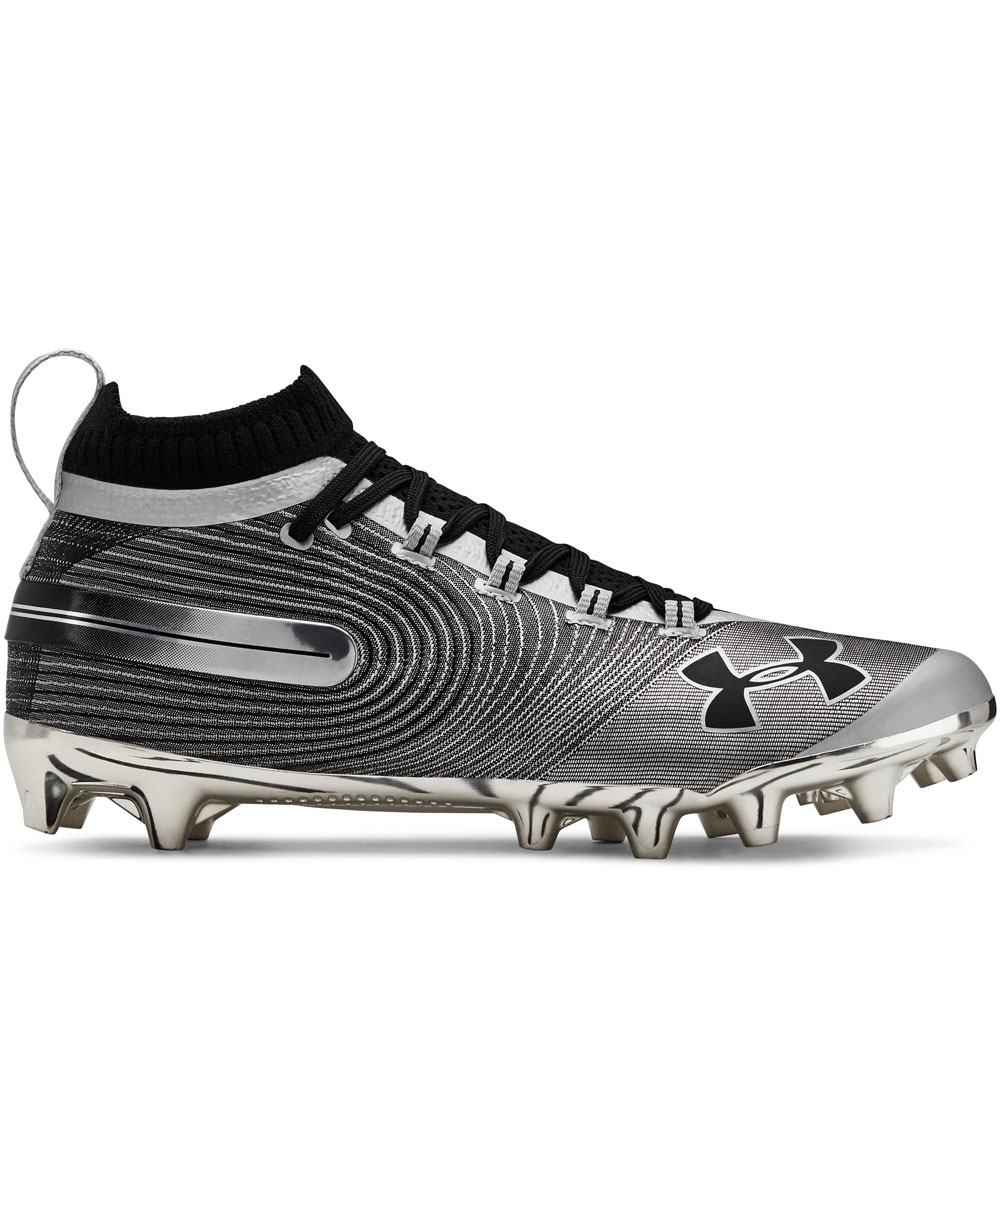 silver under armour football cleats